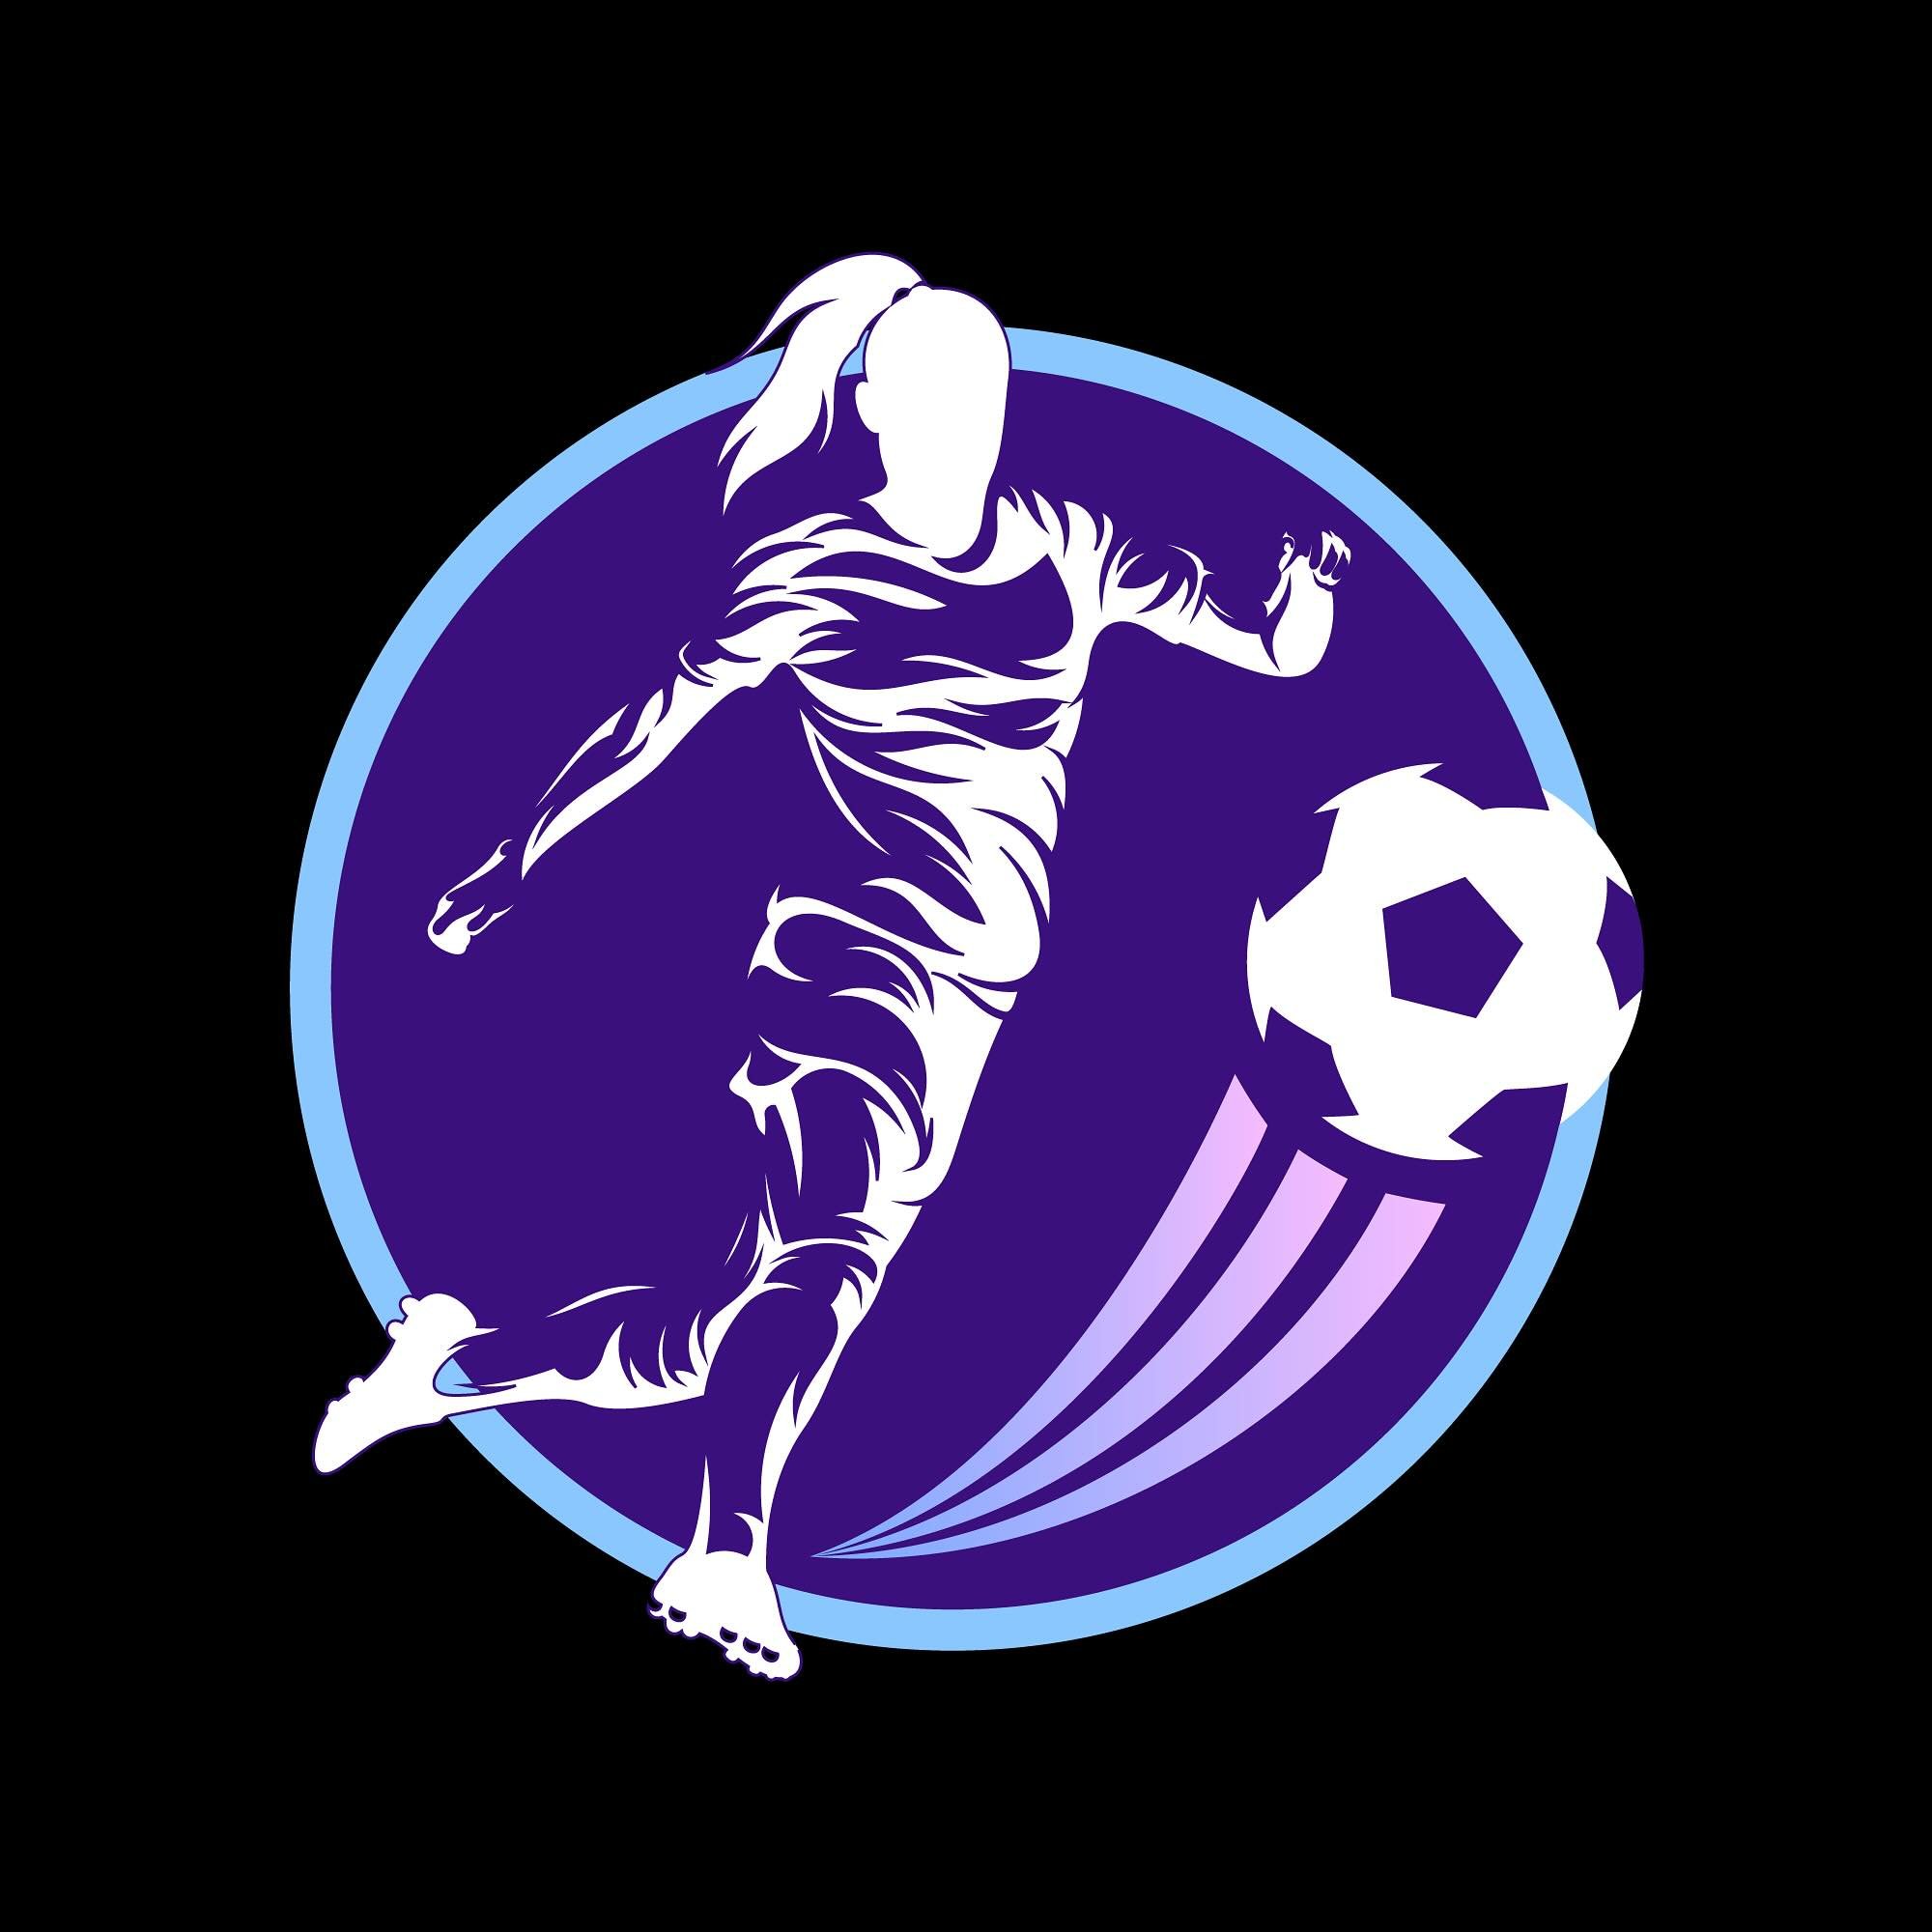 In case you missed it: We are so excited to debut our new league logo and website as we head into the upcoming summer sessions.

Teams/partial teams and individual players are invited to join the summer outdoor league starting May 28th. 

REGISTER NO